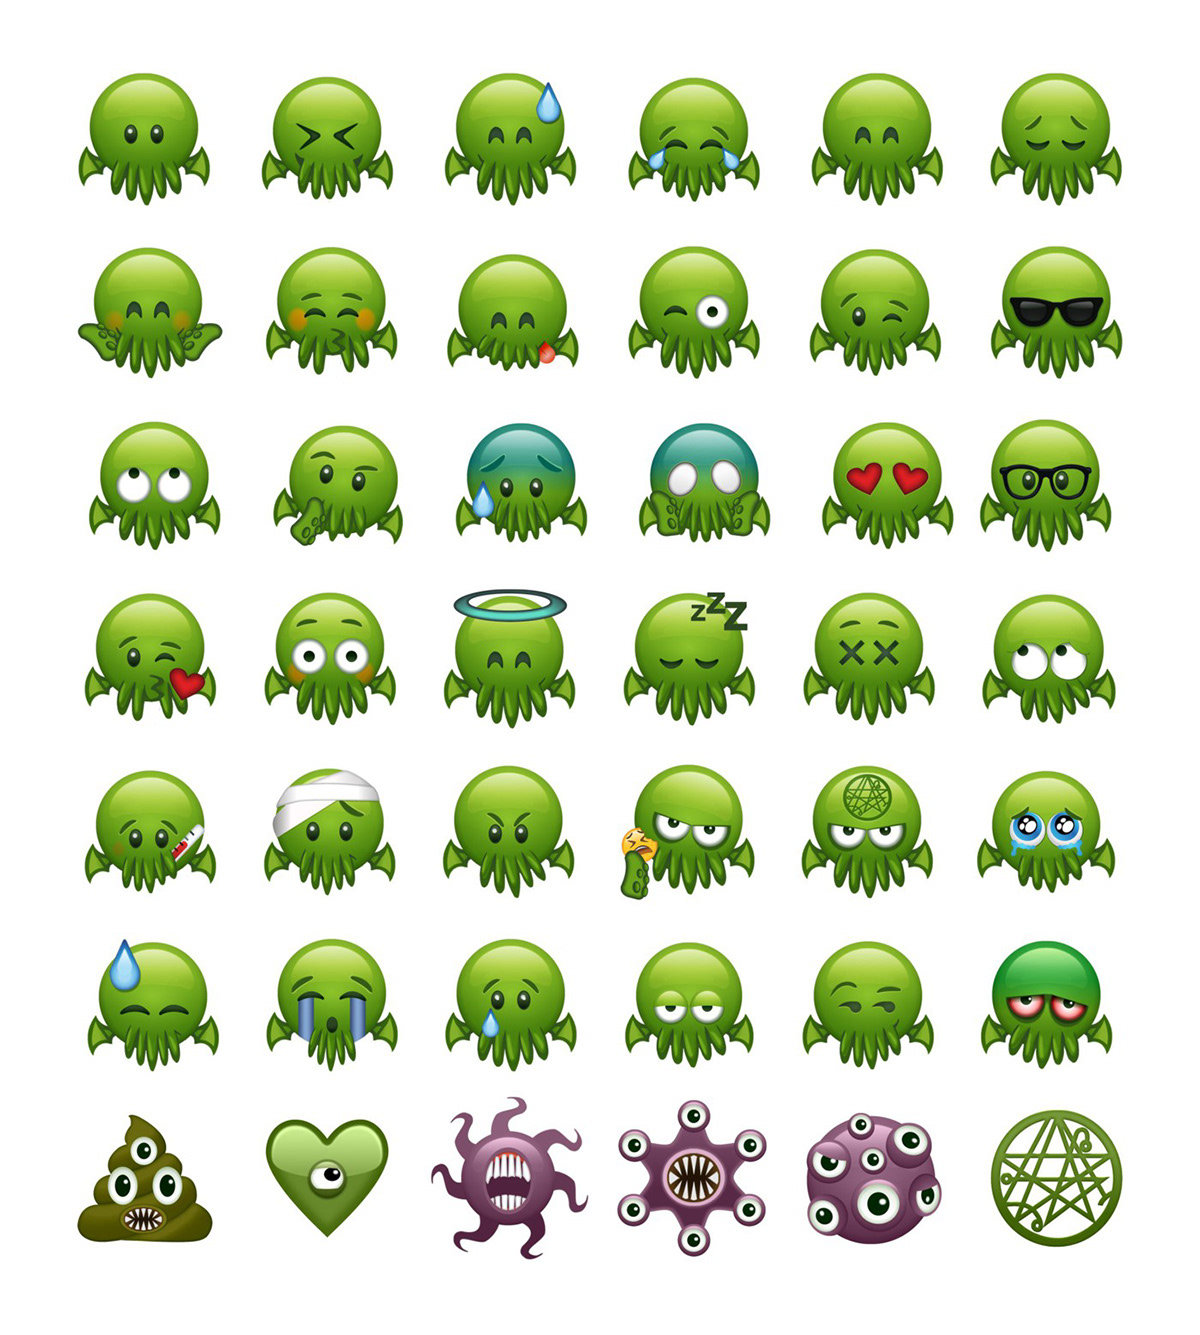 cthulhu lovecraft hp lovecraft Emojis imessage ios design Iconos Character design 